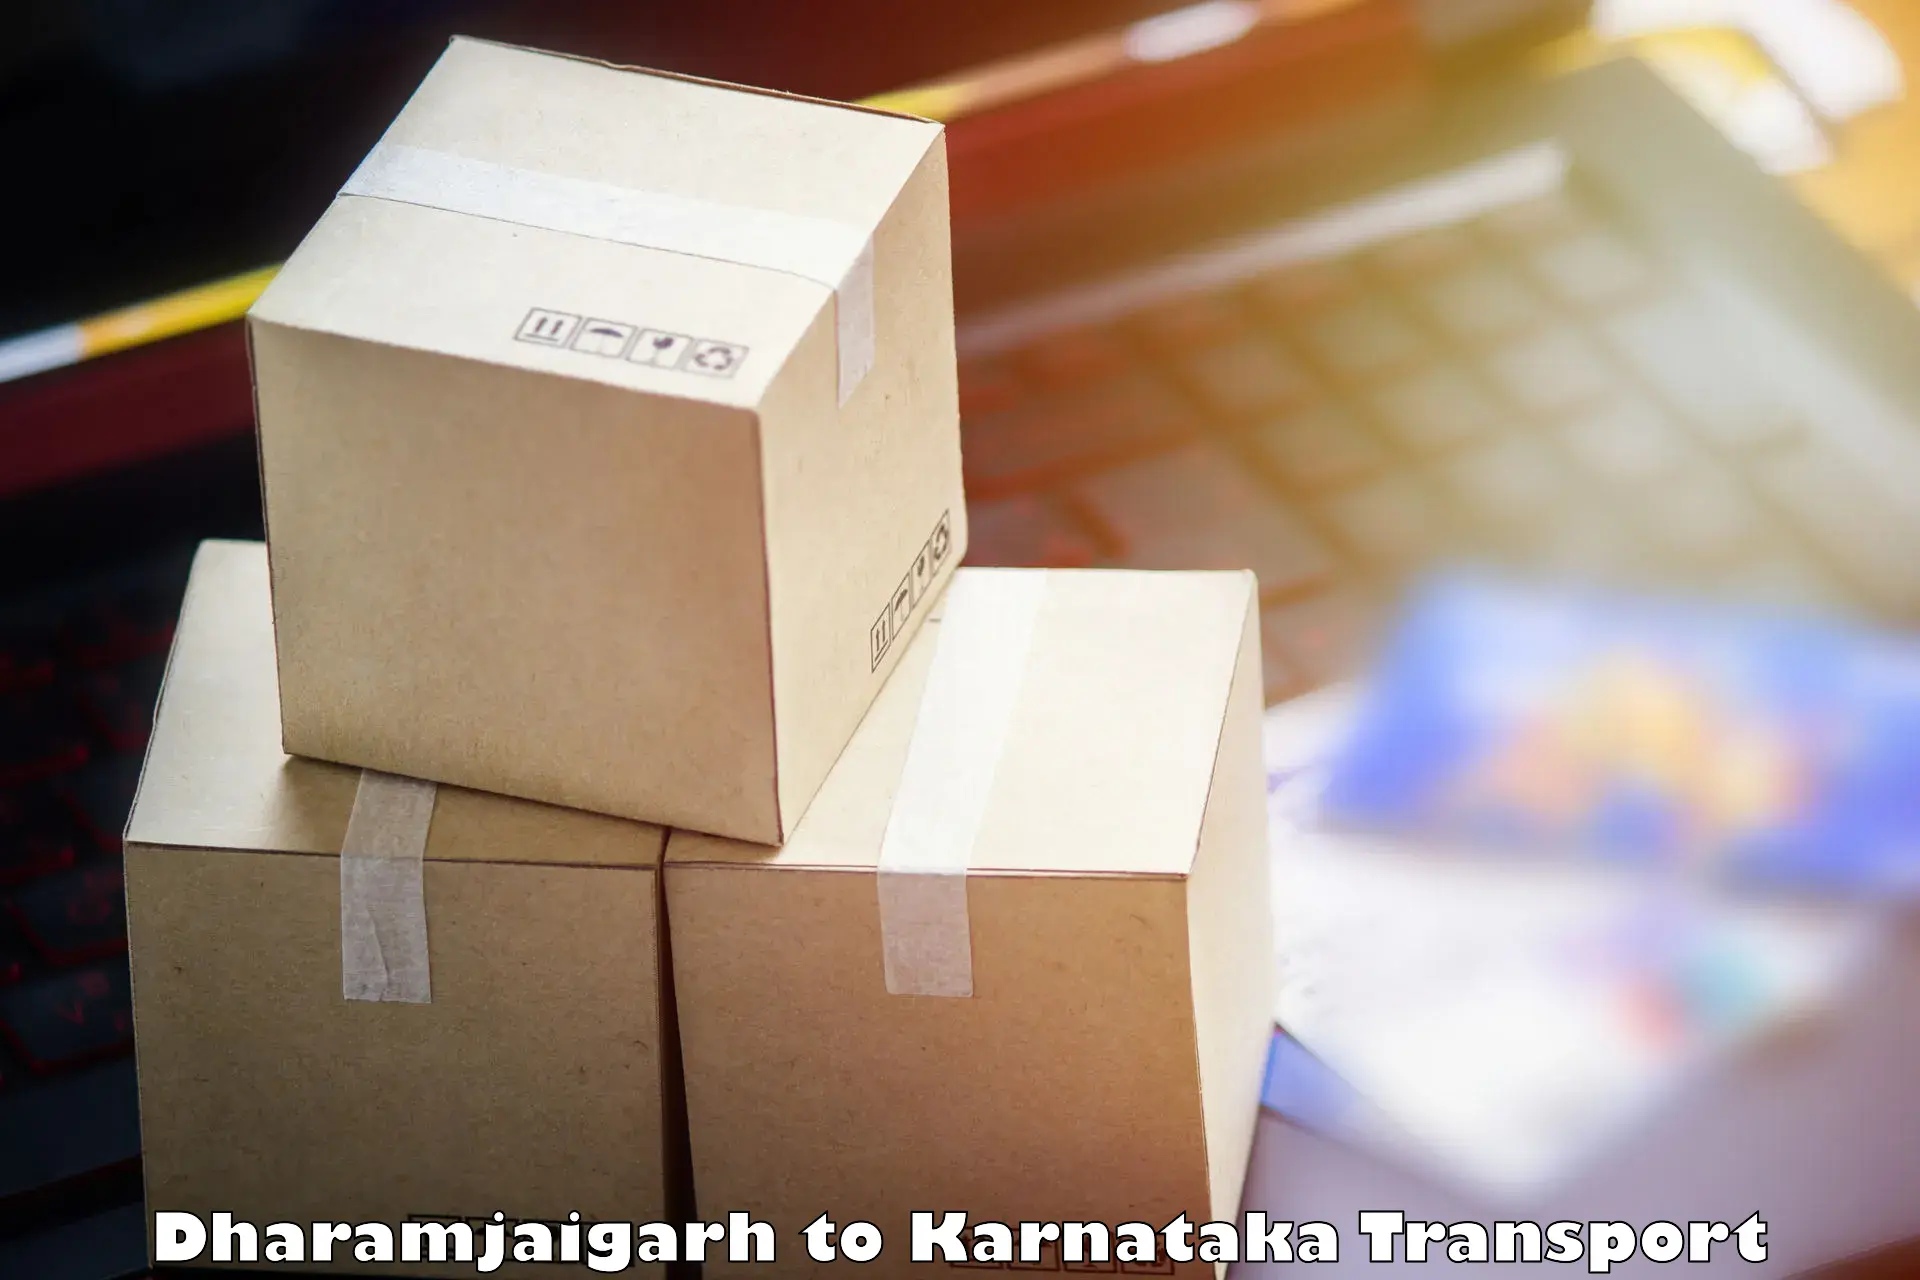 Delivery service Dharamjaigarh to Bengaluru